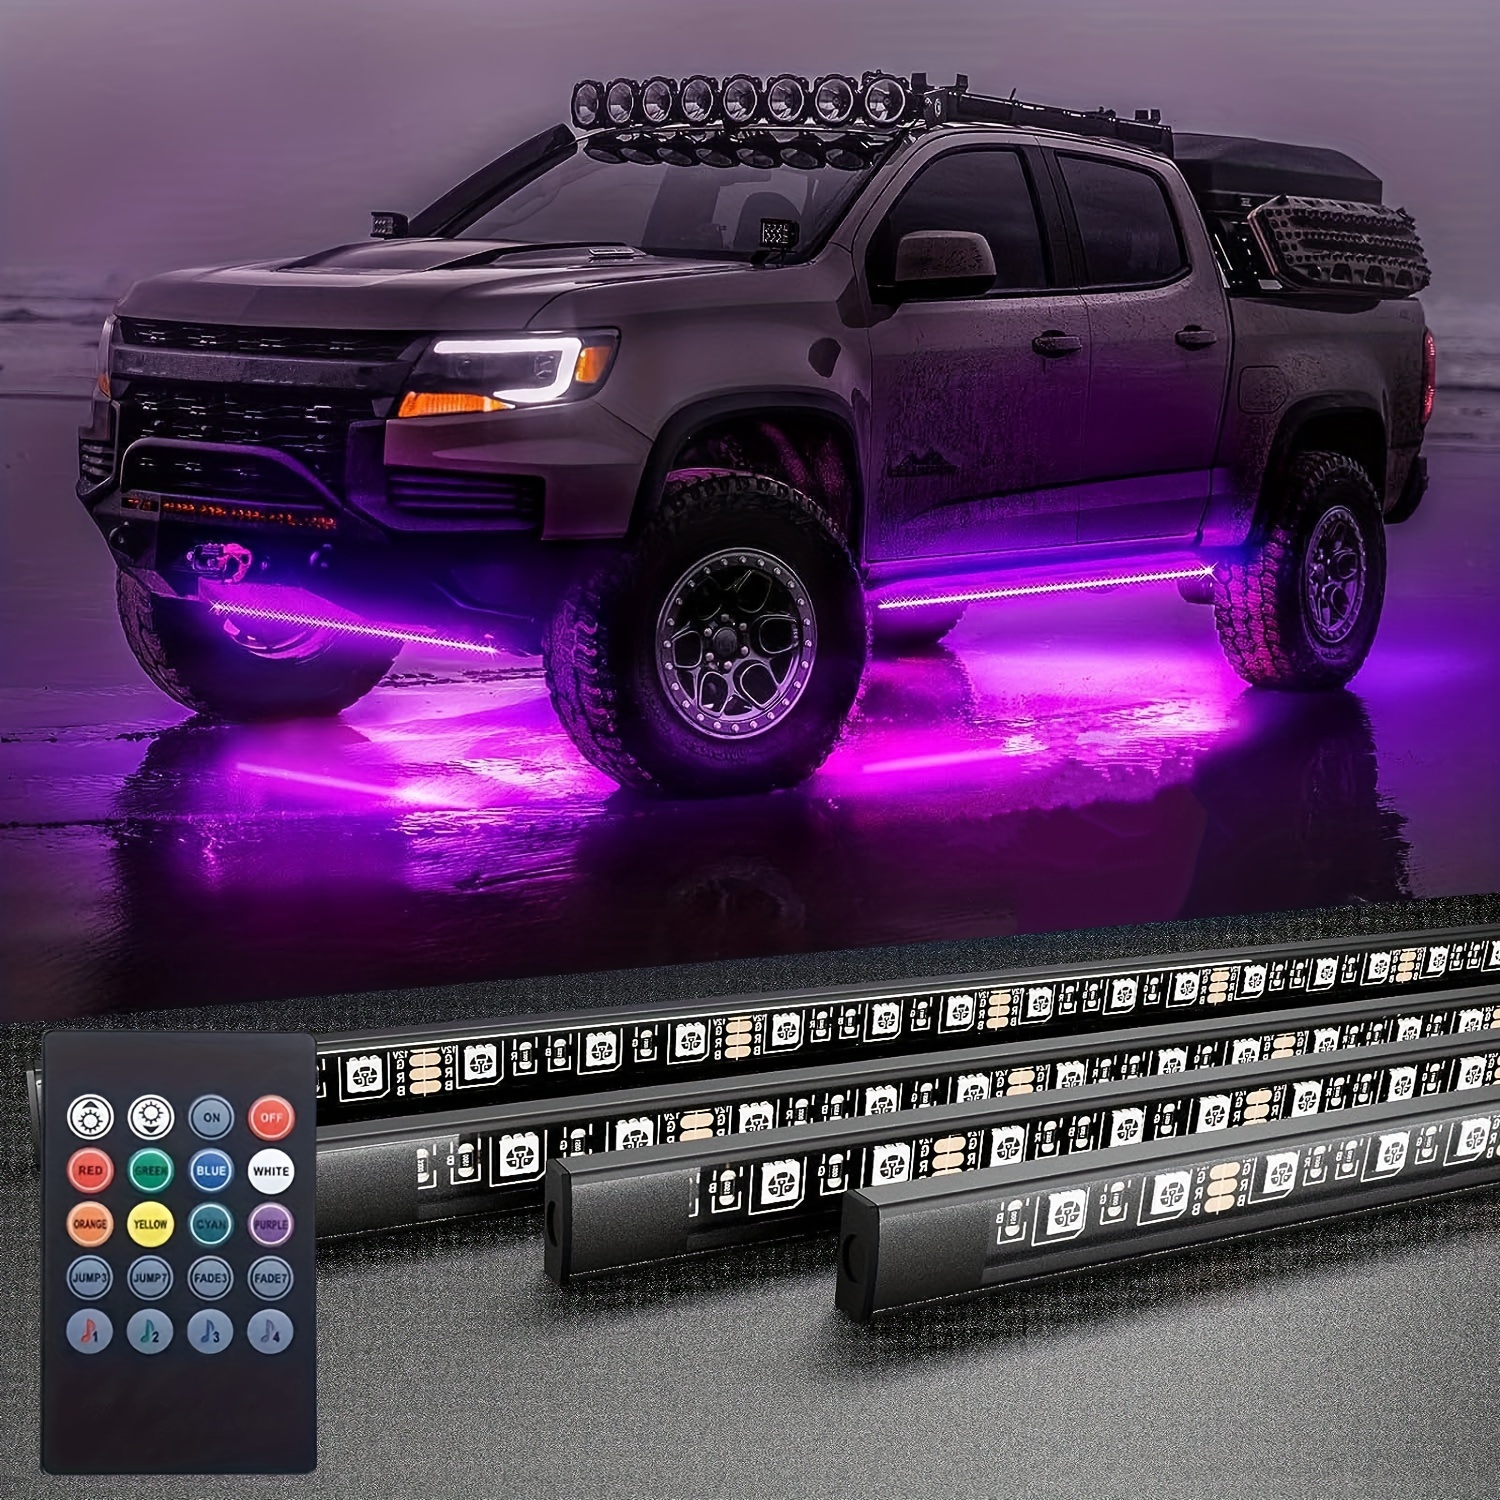 MICTUNING 12V Car Underglow Lights, Neon Accent Lights Strip Undercar Glow  Light Underbody Light, Waterproof Exterior Car Lights with APP Control 